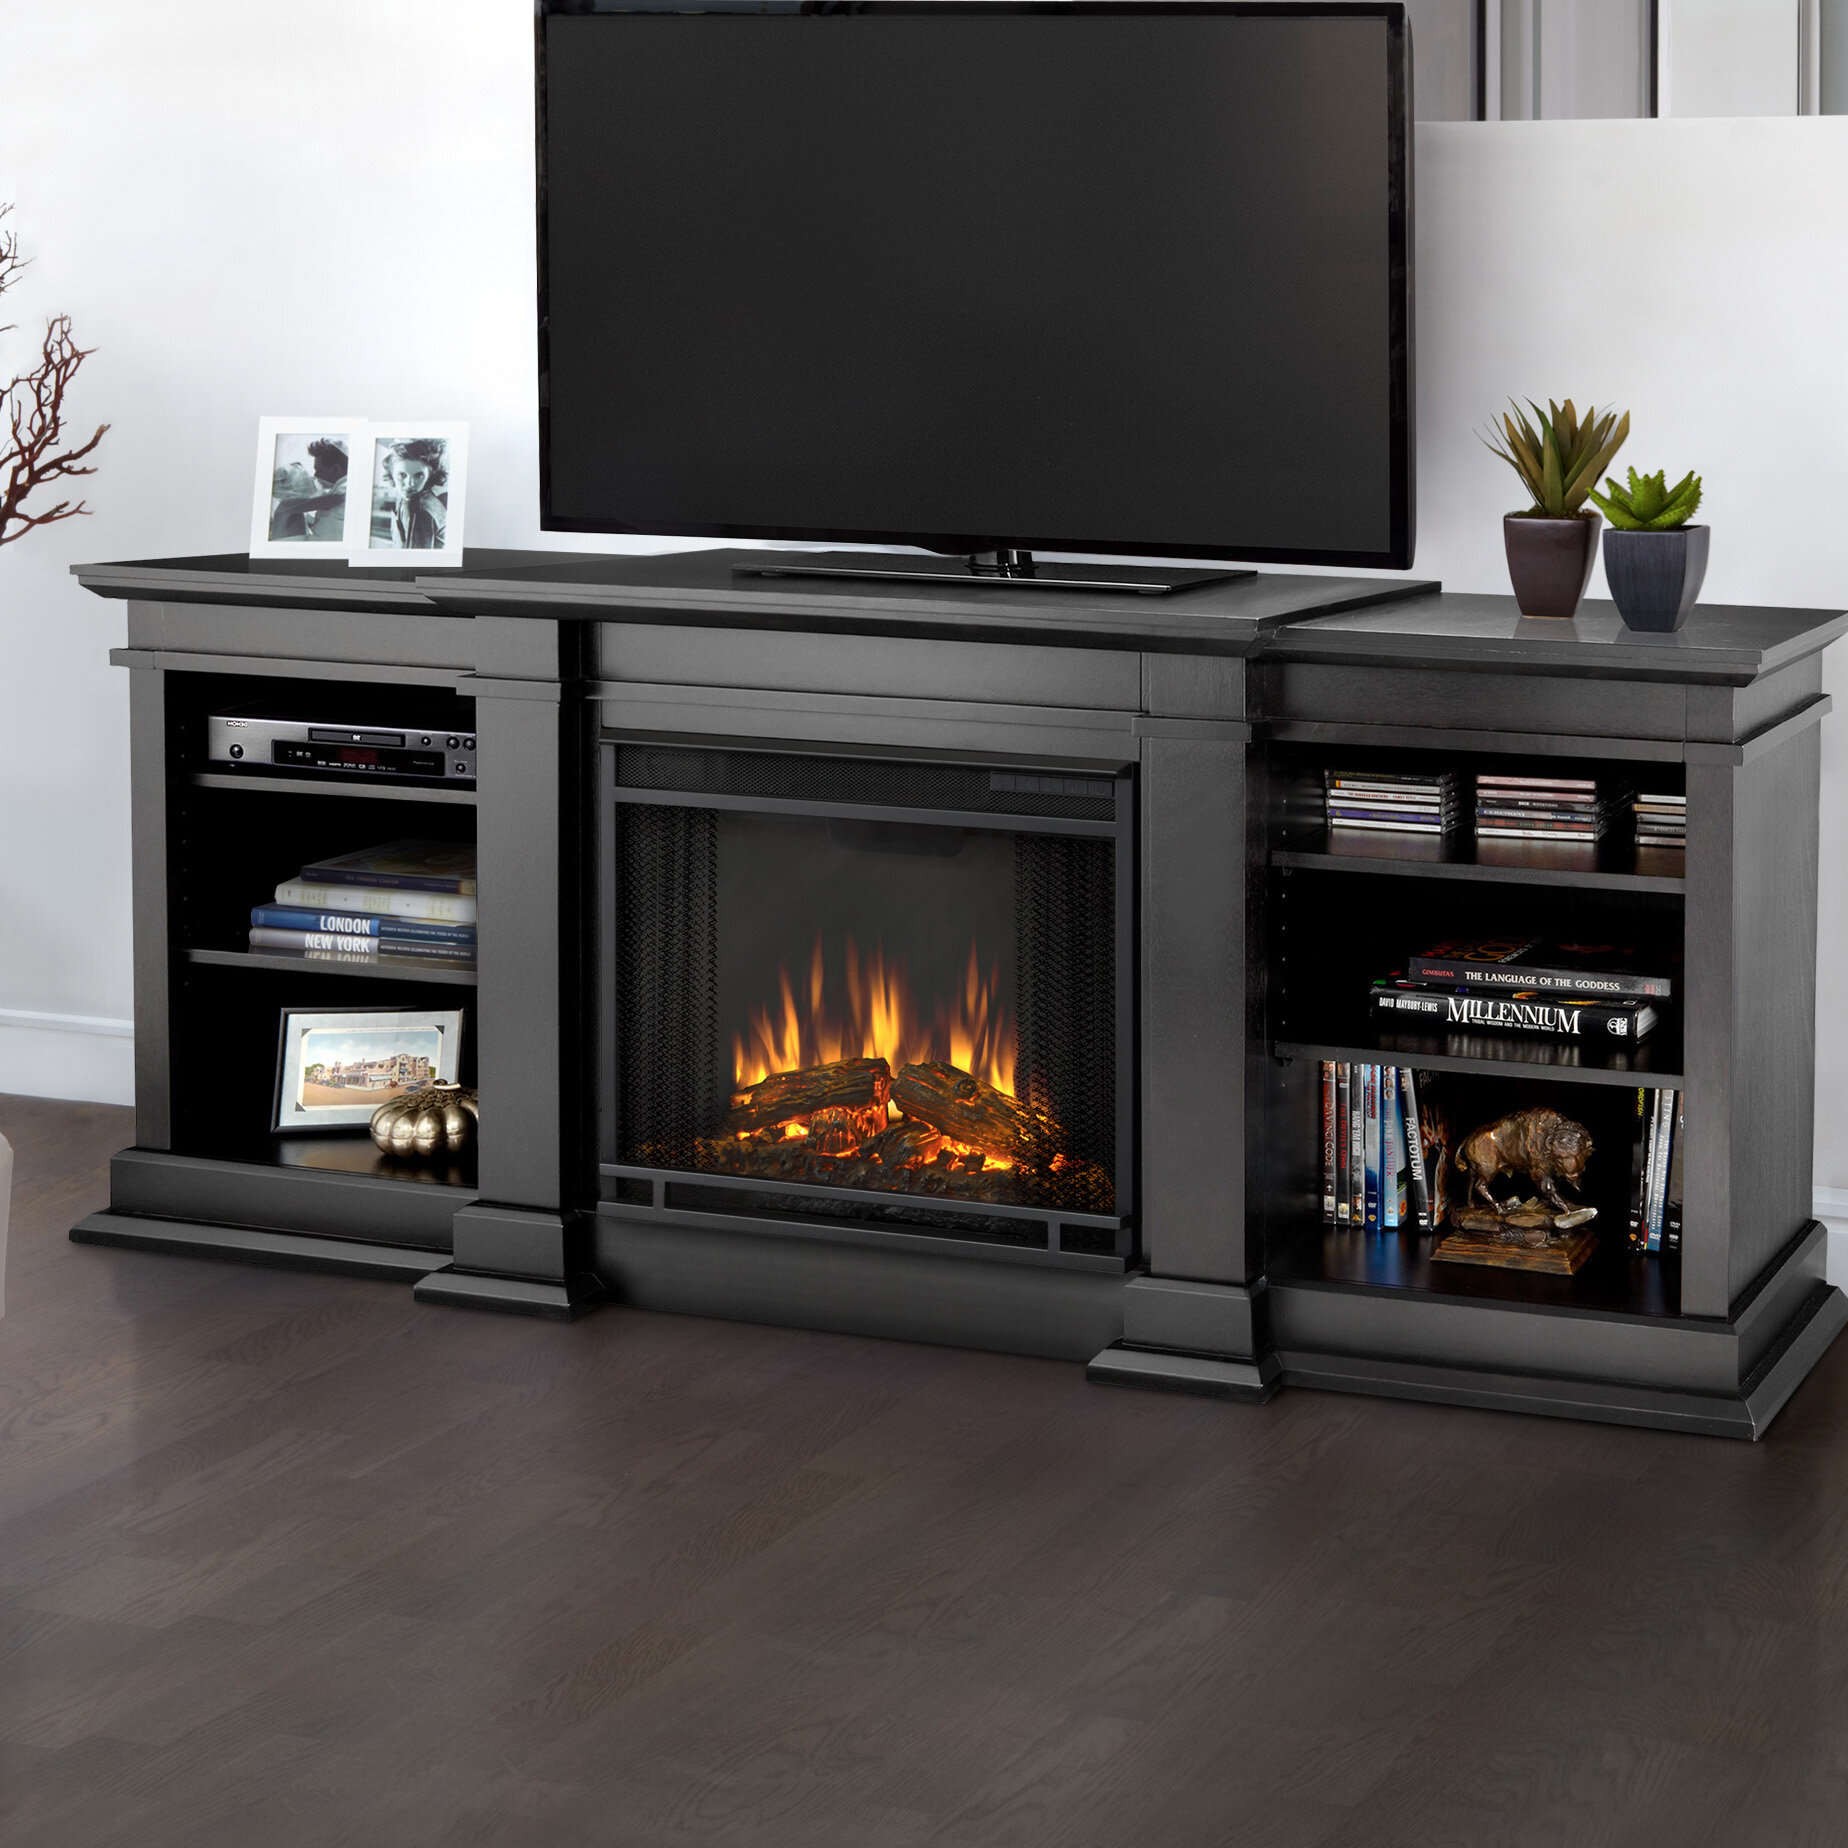 Mirrored Tv Stand with Fireplace Inspirational Entertainment Center Standard Tv Stands & Entertainment